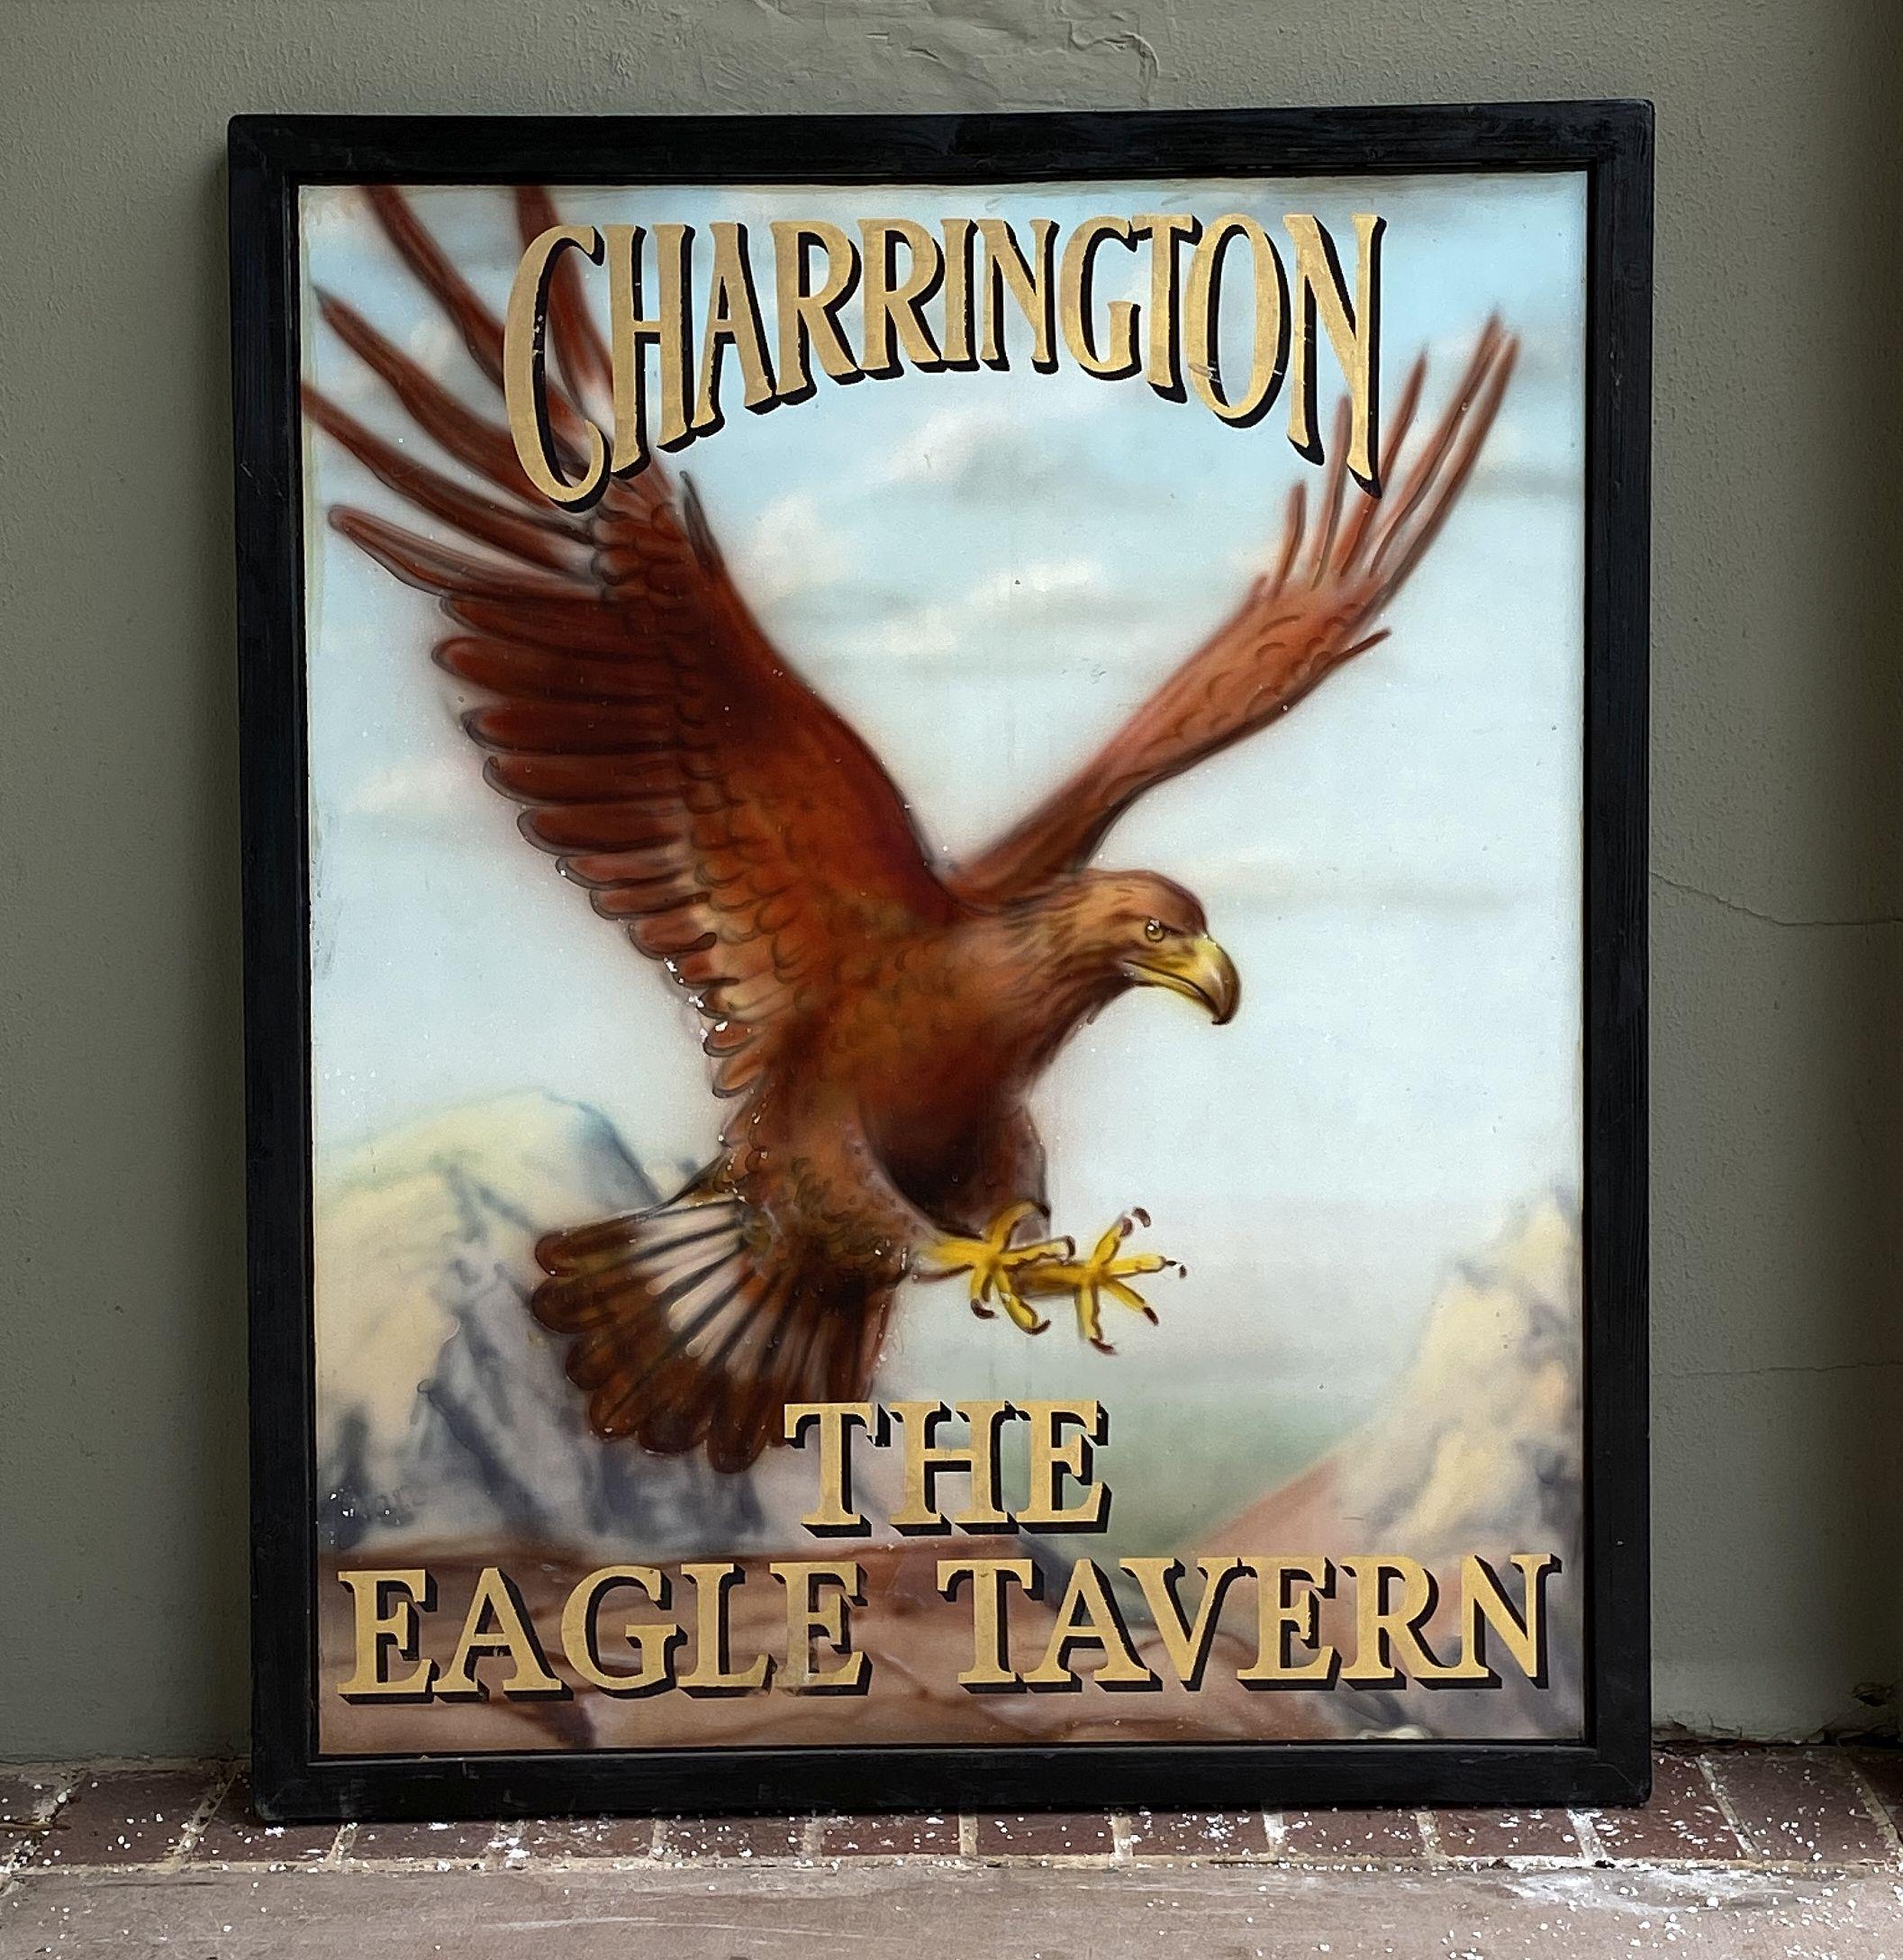 An authentic English pub sign (one-sided) featuring a painting of an eagle in flight with mountains in the background, entitled: Charrington - The Eagle Tavern.

A very fine example of vintage advertising artwork, ready for display.

Charrington &